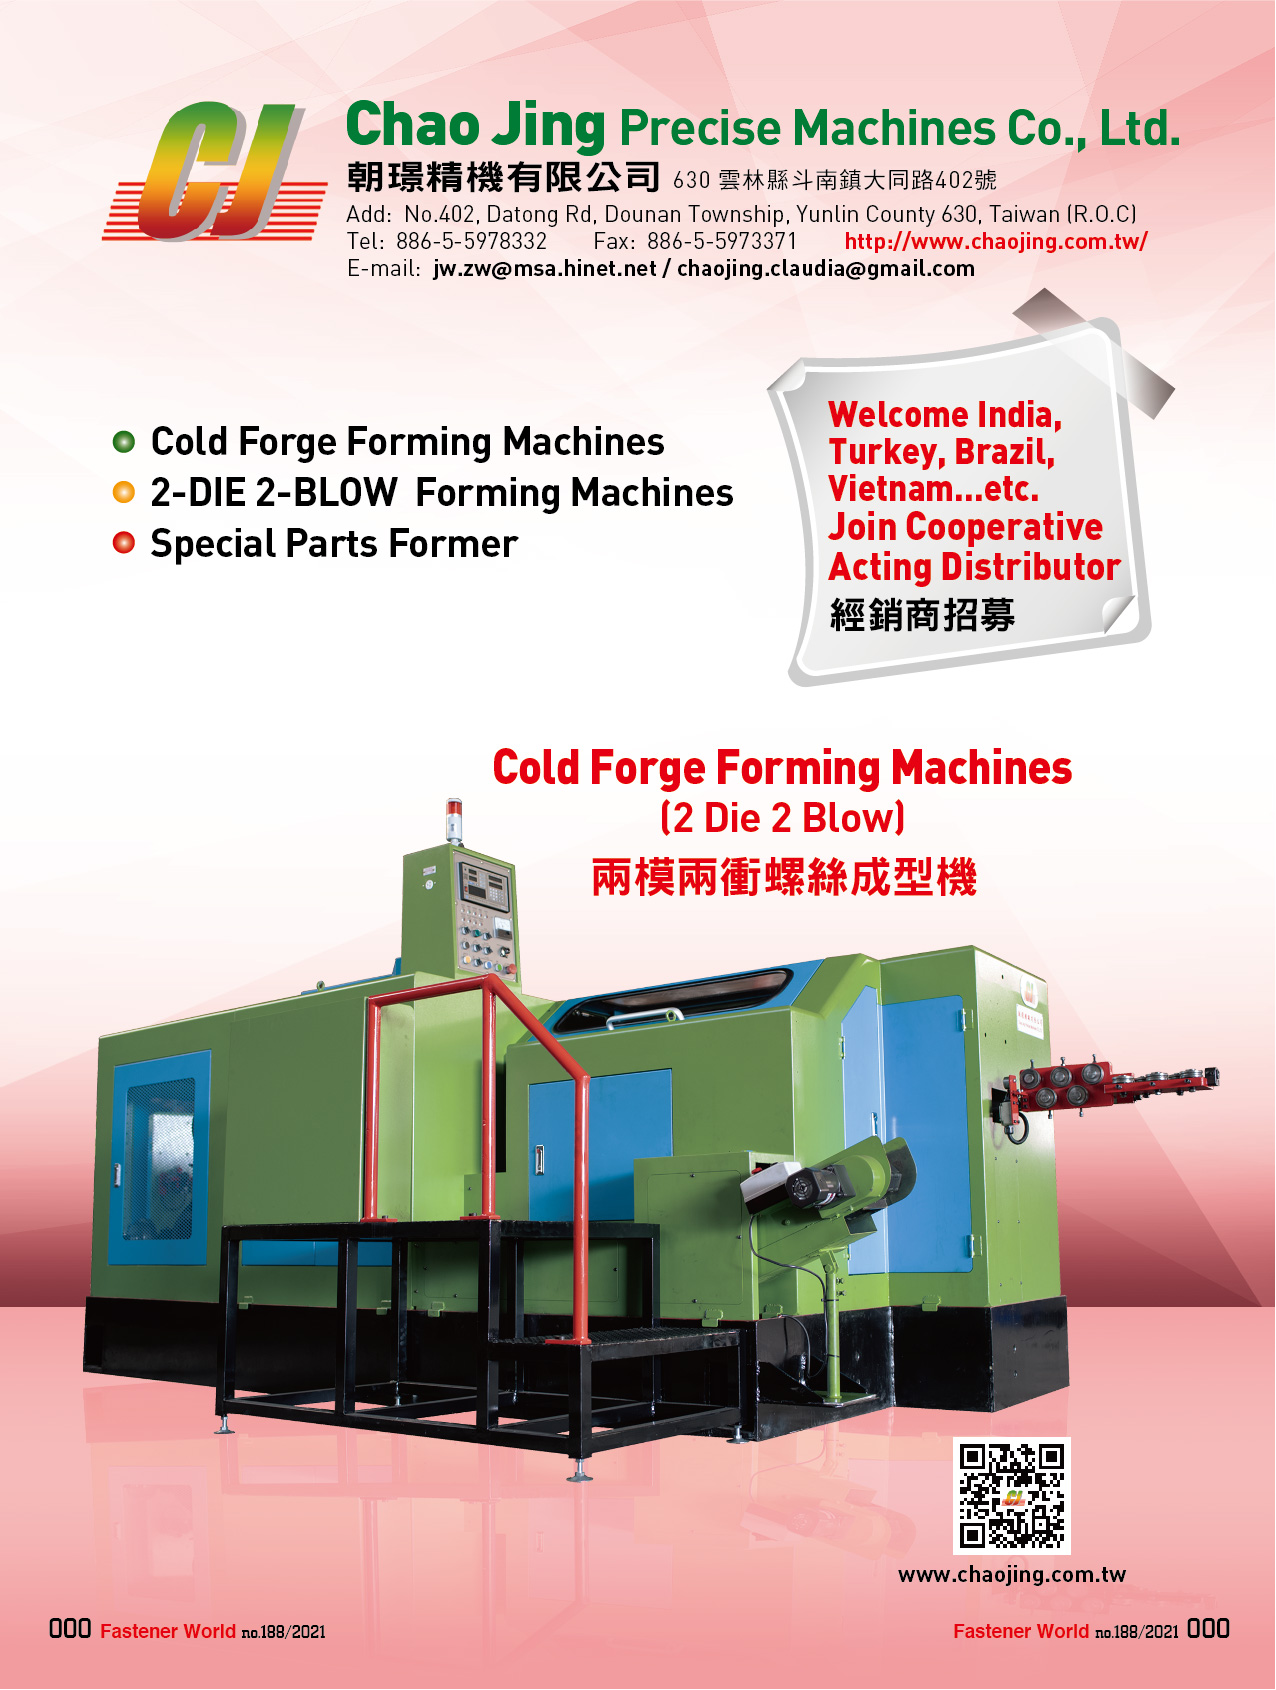 Chao Jing Precise Machines Enterprise Co., Ltd. (San Sing Screw Forming Machines) , Cold Forge Forming Machines, 2-Die 2-Blow Forming Machines, Special Parts Former